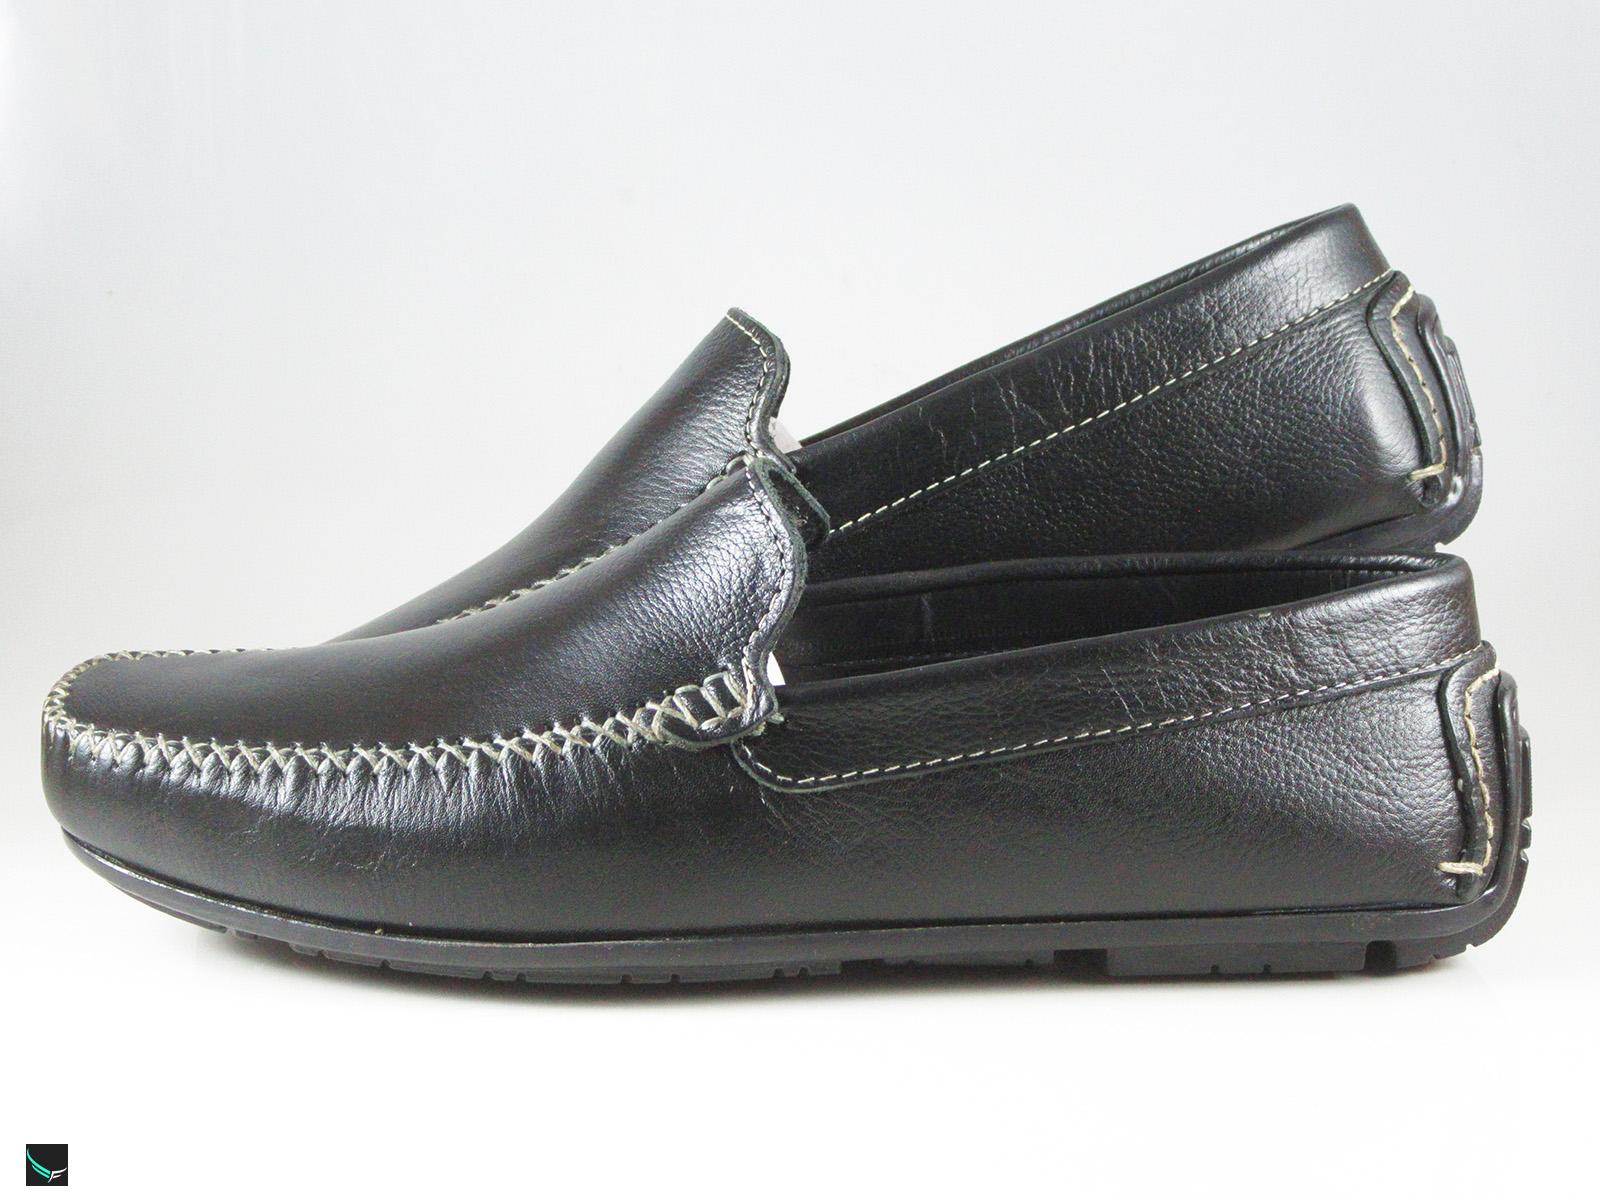 Stylish Mens Black Leather Loafers - 4722 - Leather Collections On ...